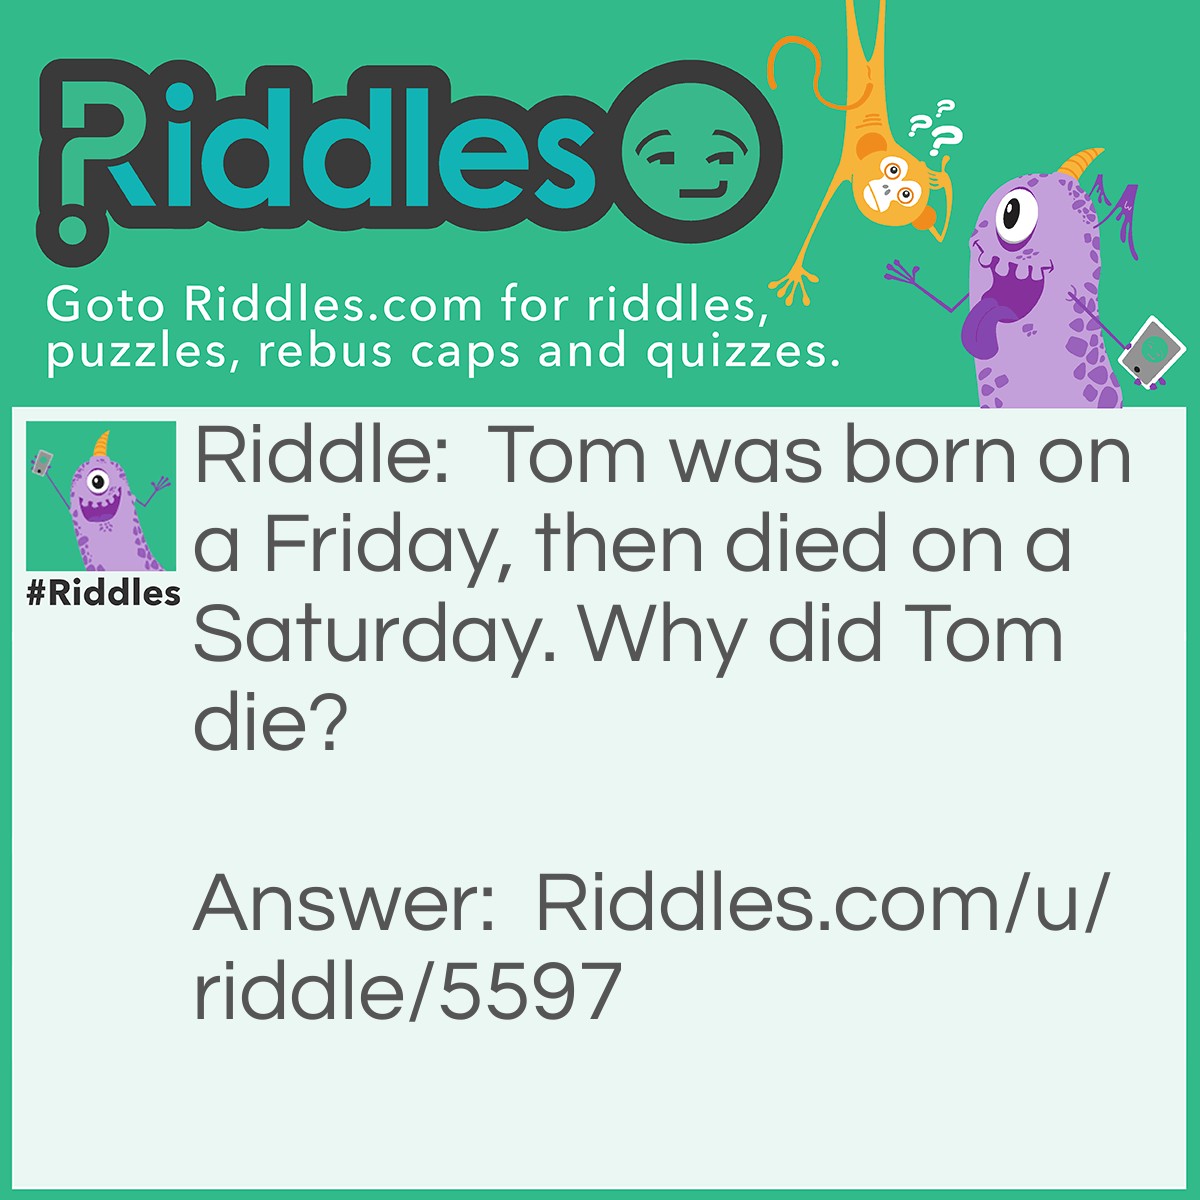 Riddle: Tom was born on a Friday, then died on a Saturday. Why did Tom die? Answer: Because he was a mayfly. Mayflies only live for 24 hours.